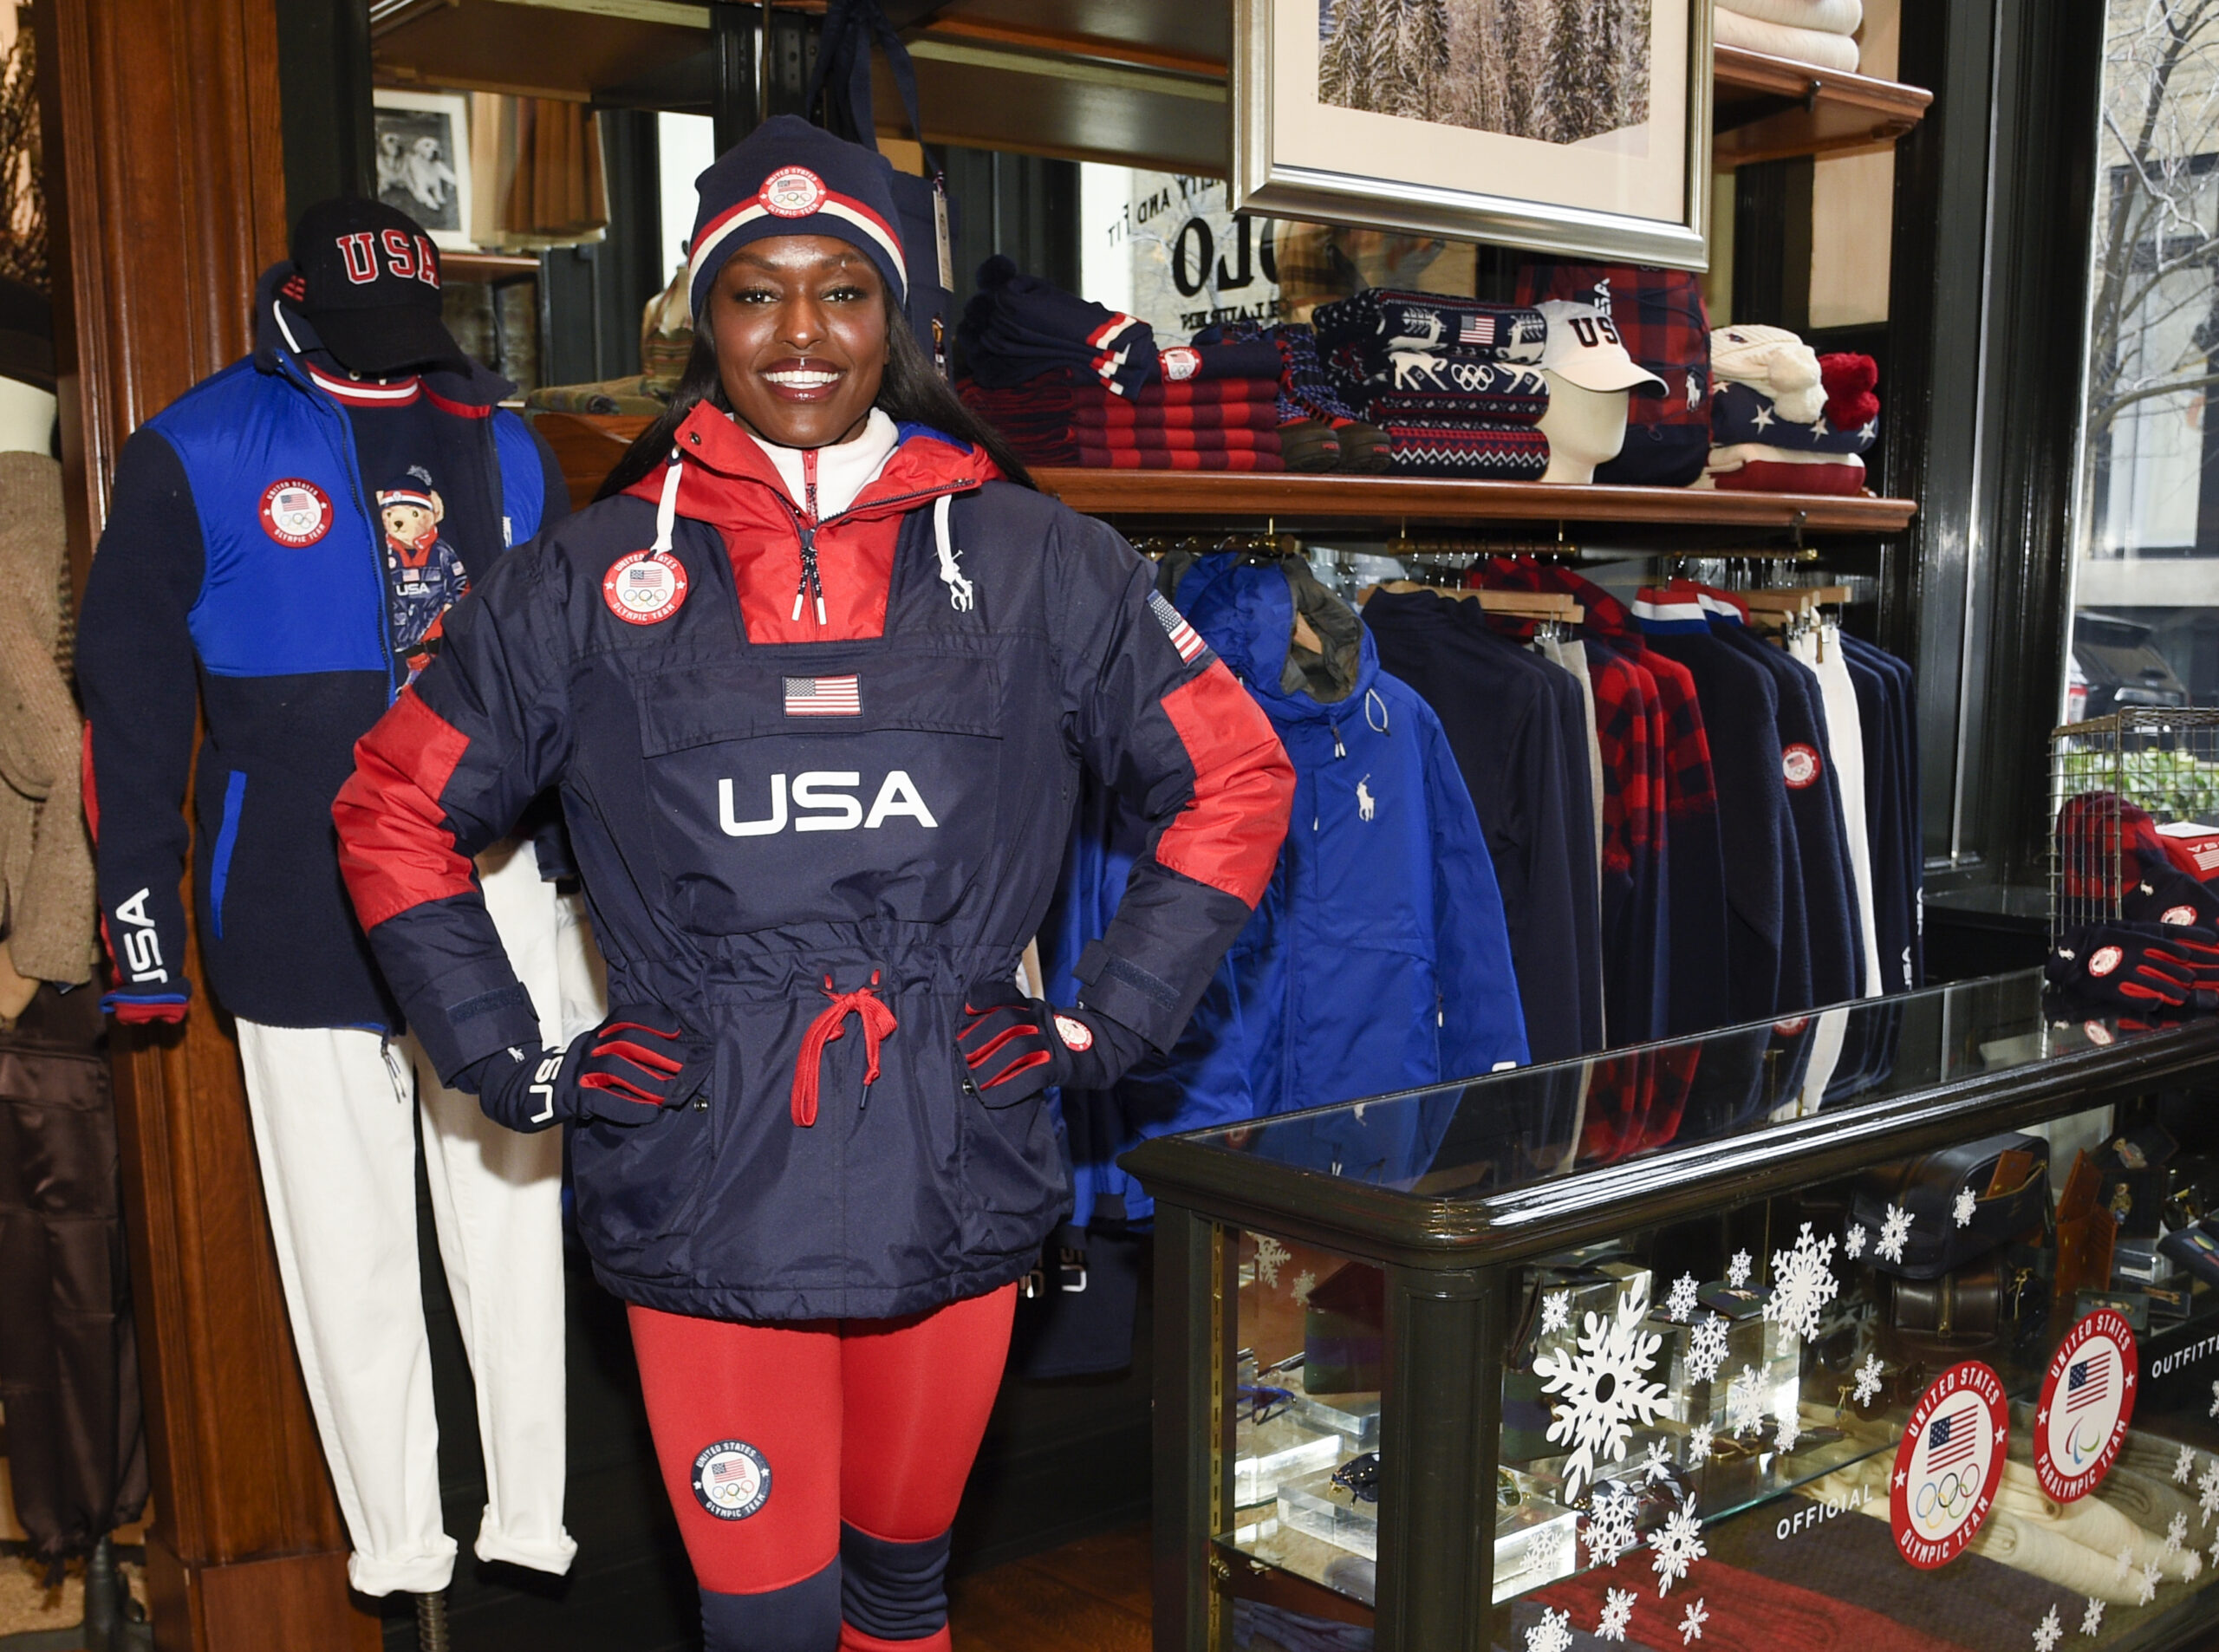 Bobsledder Aja Evans models the Team USA Beijing winter Olympics opening ceremony uniforms designed by Ralph Lauren on Wednesday, Jan. 19, 2022, in New York. (Photo by Evan Agostini/Invision/AP)